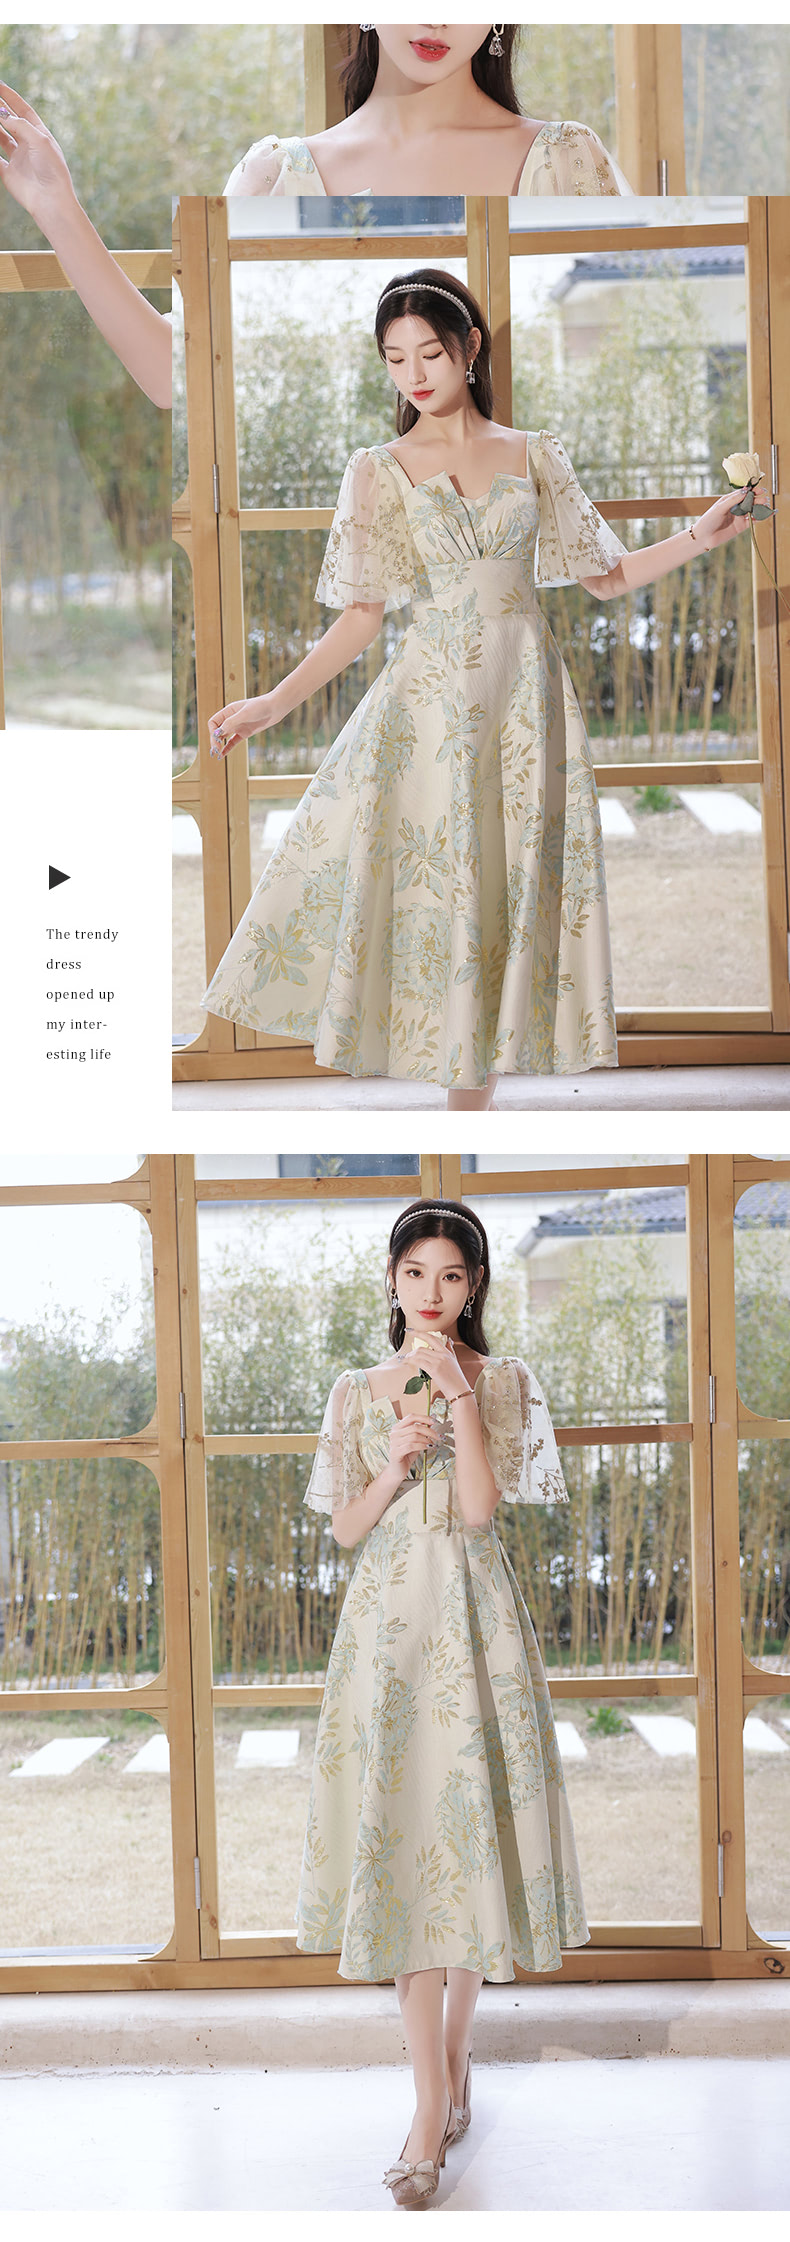 A-Line-Boutique-Floral-Printed-Midi-Prom-Dress-with-Short-Sleeves10.jpg